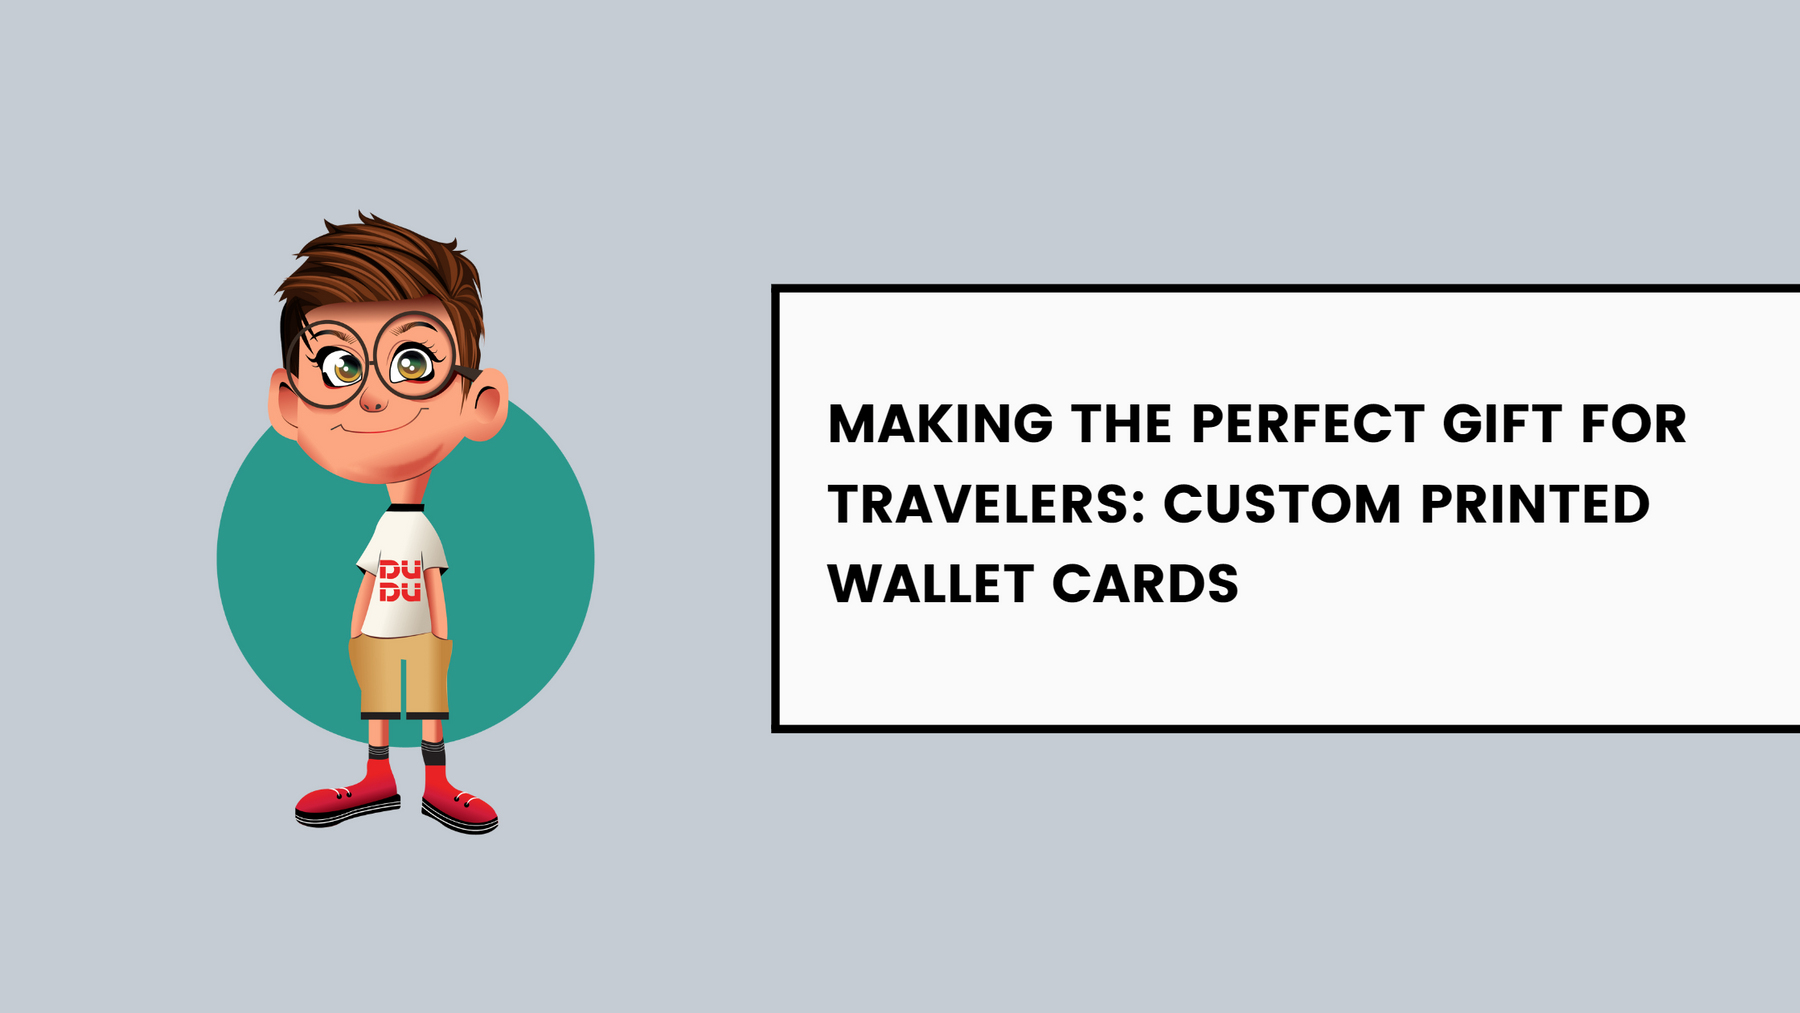 Making The Perfect Gift For Travelers: Custom Printed Wallet Cards